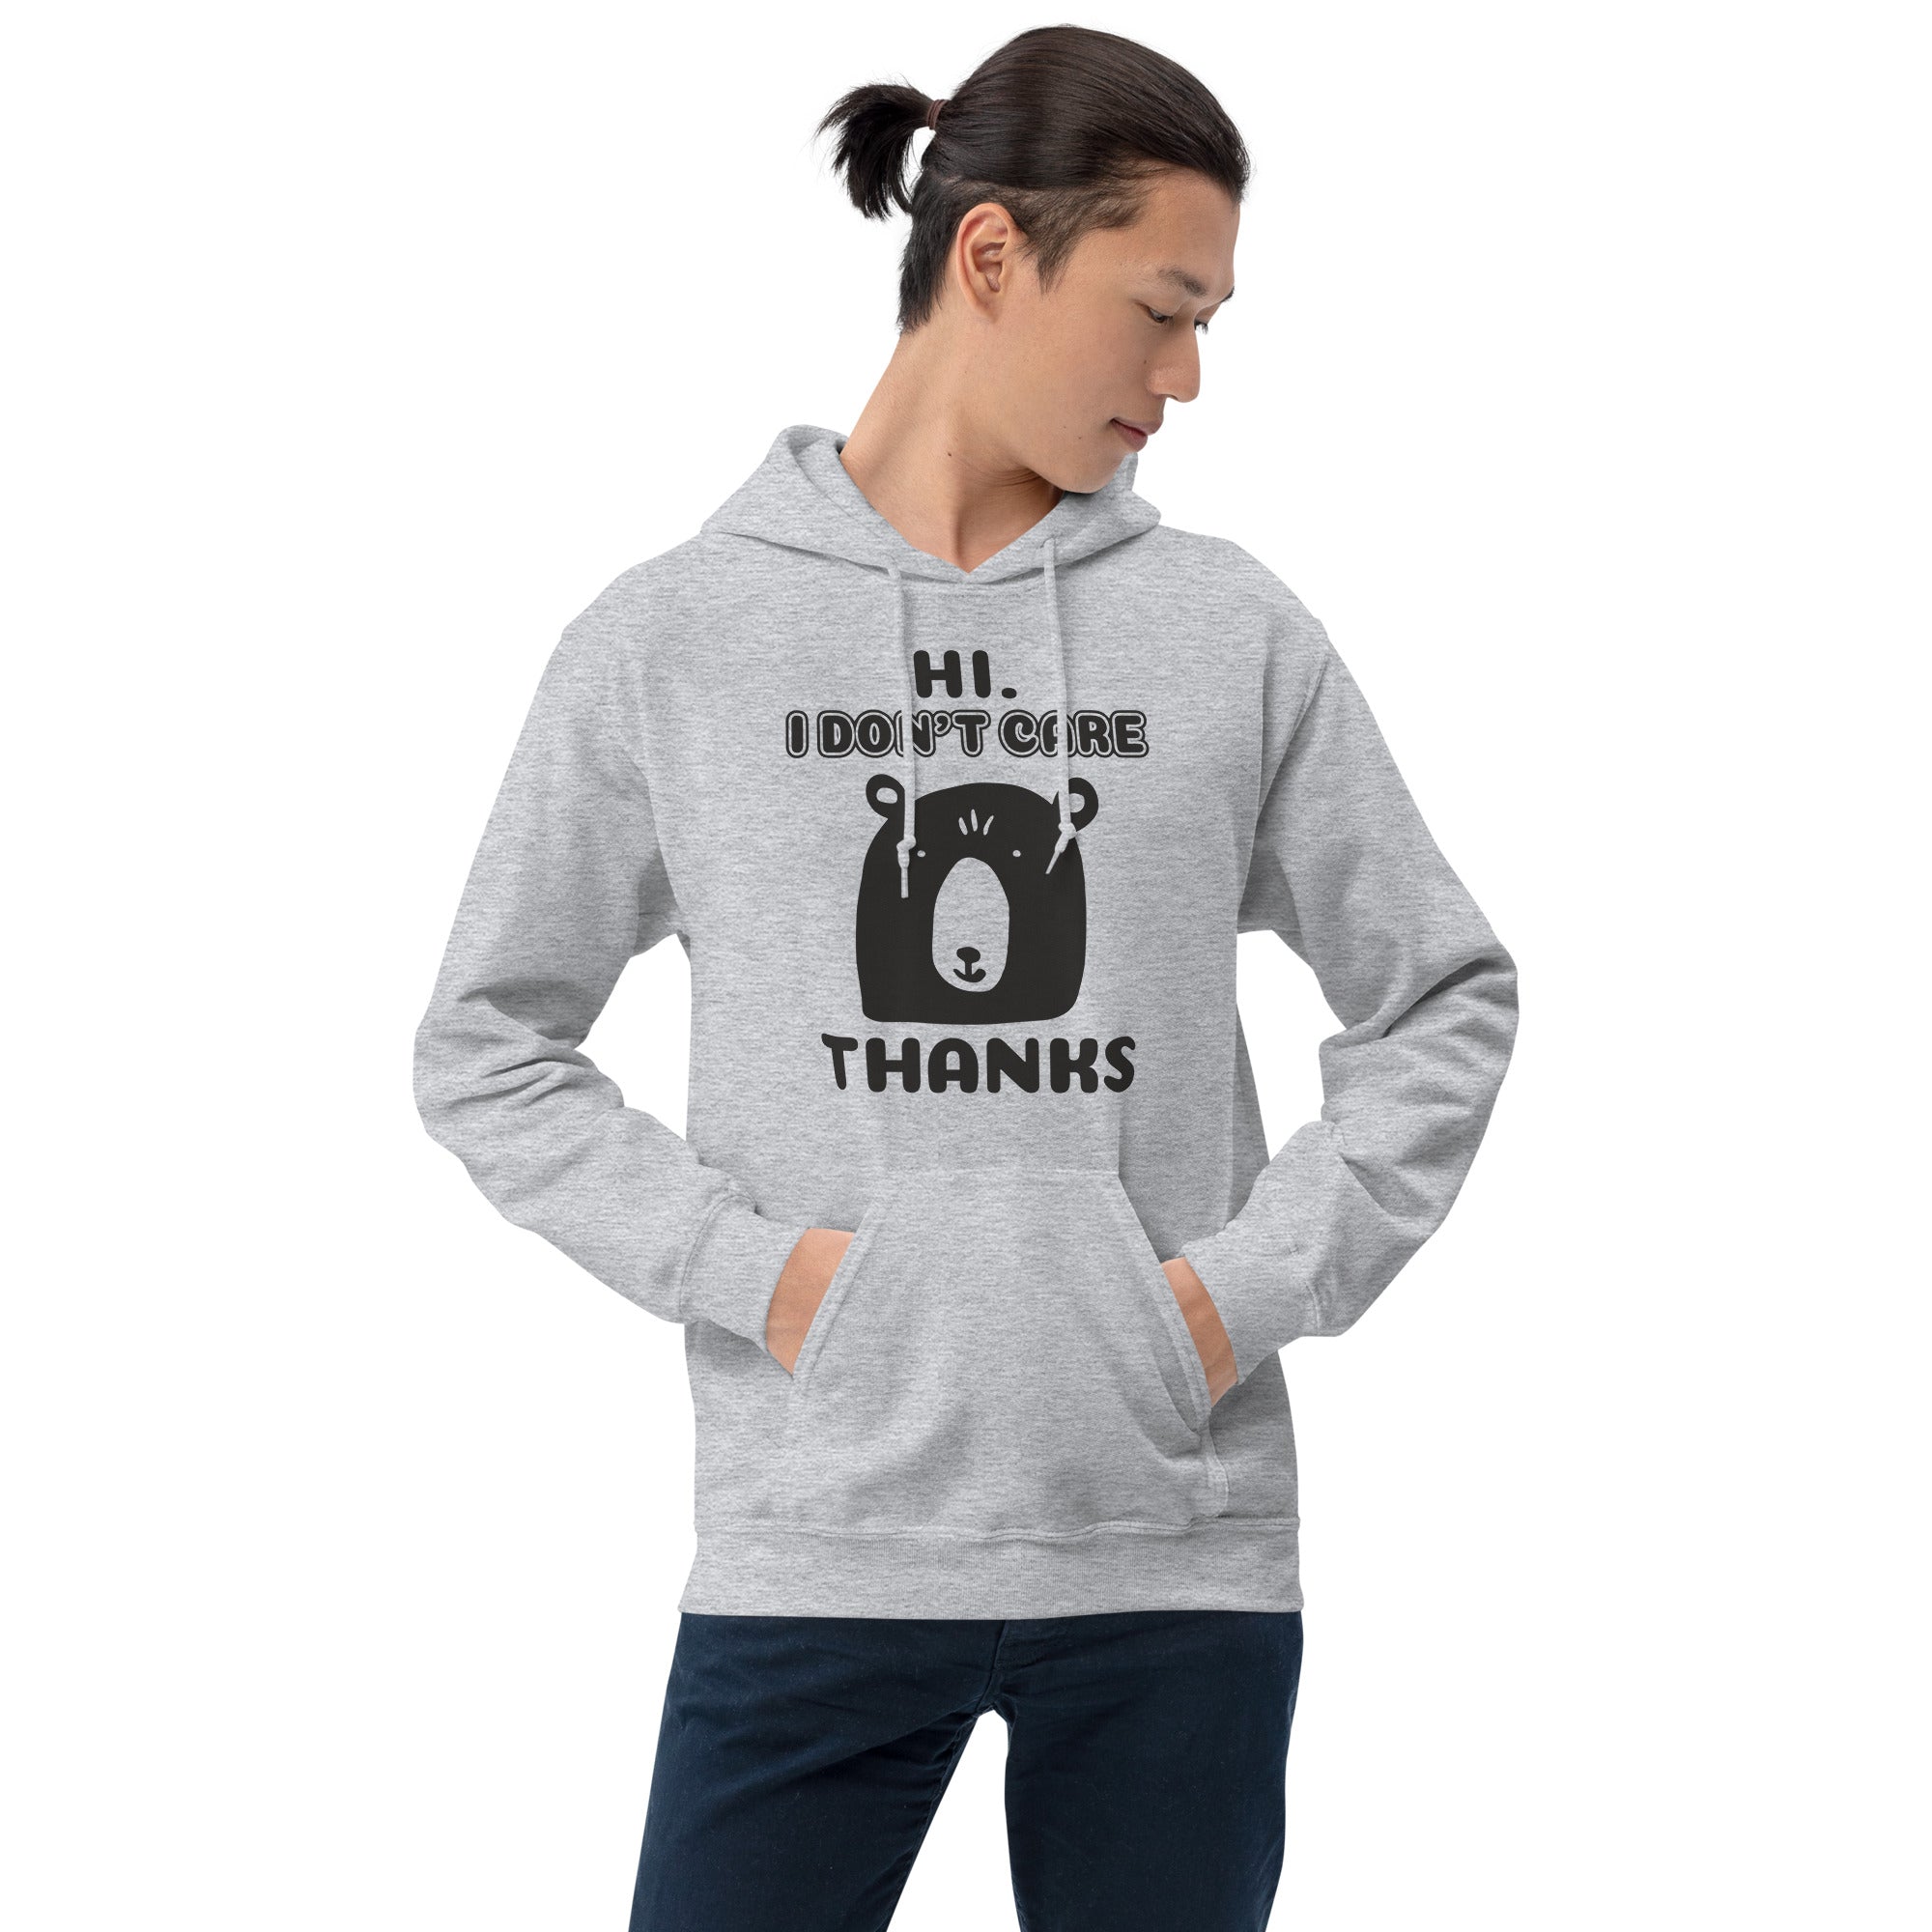 I Don't Care - Unisex Hoodie